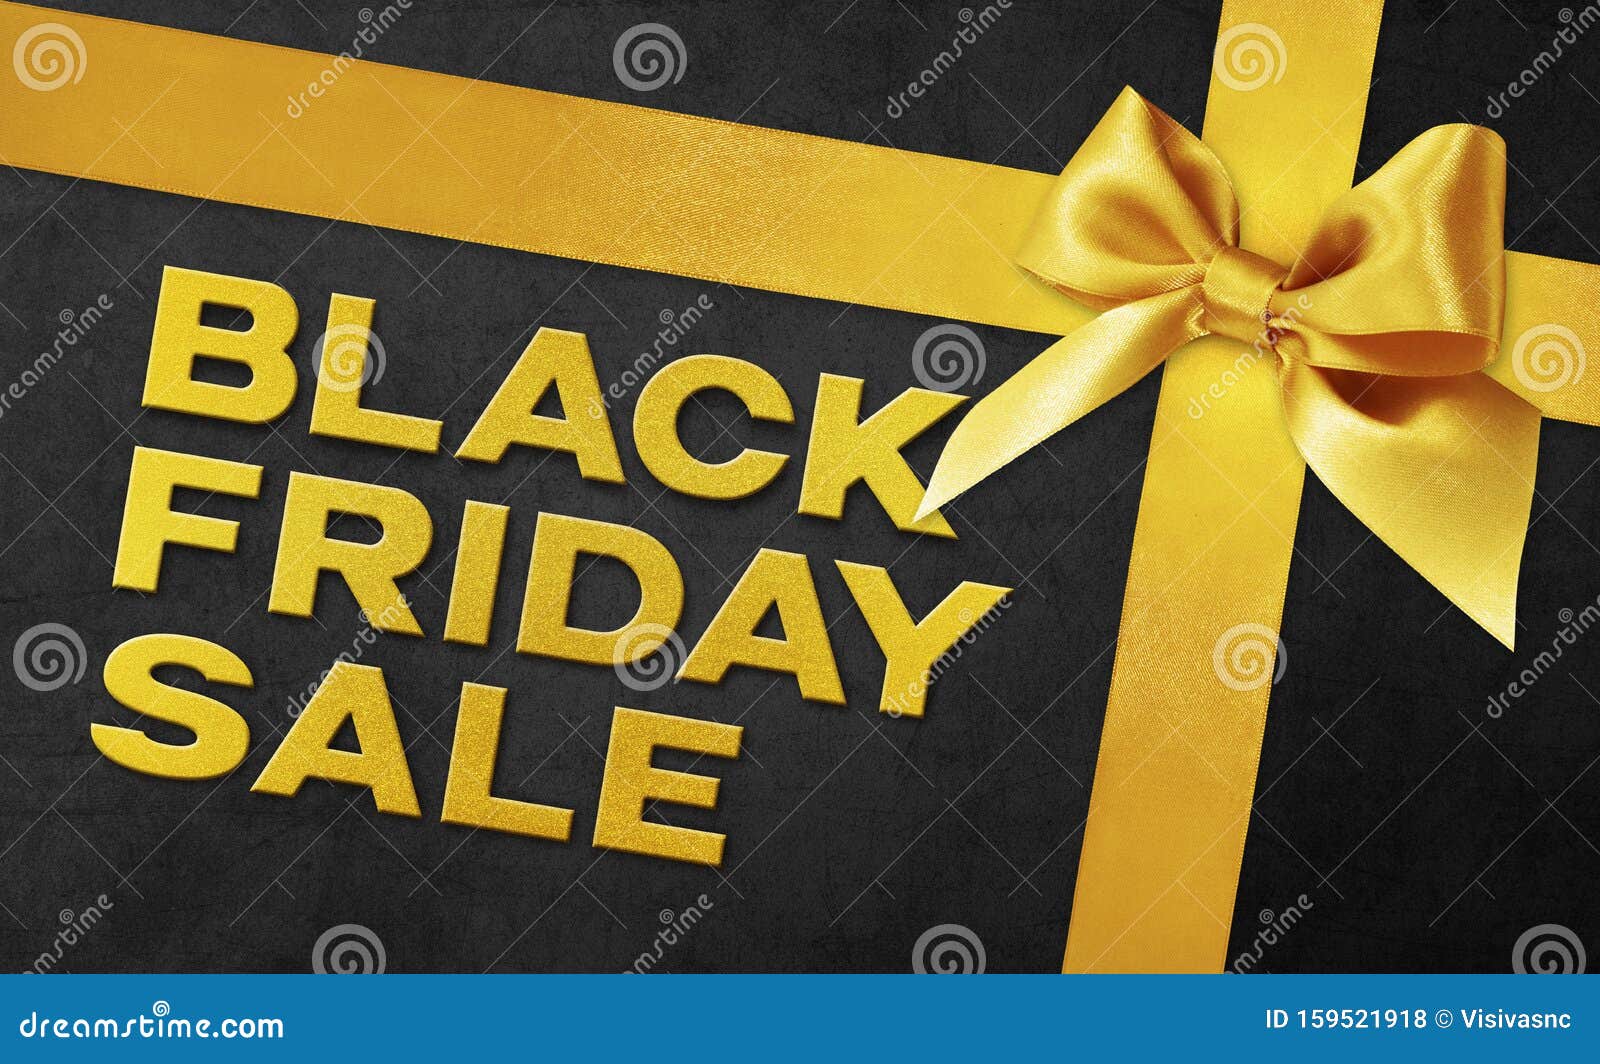 Black Friday Sale Text Write on Black Gift Card, with Golden Ribbon Bow - Will There Be Graphic Card Deals Black Friday